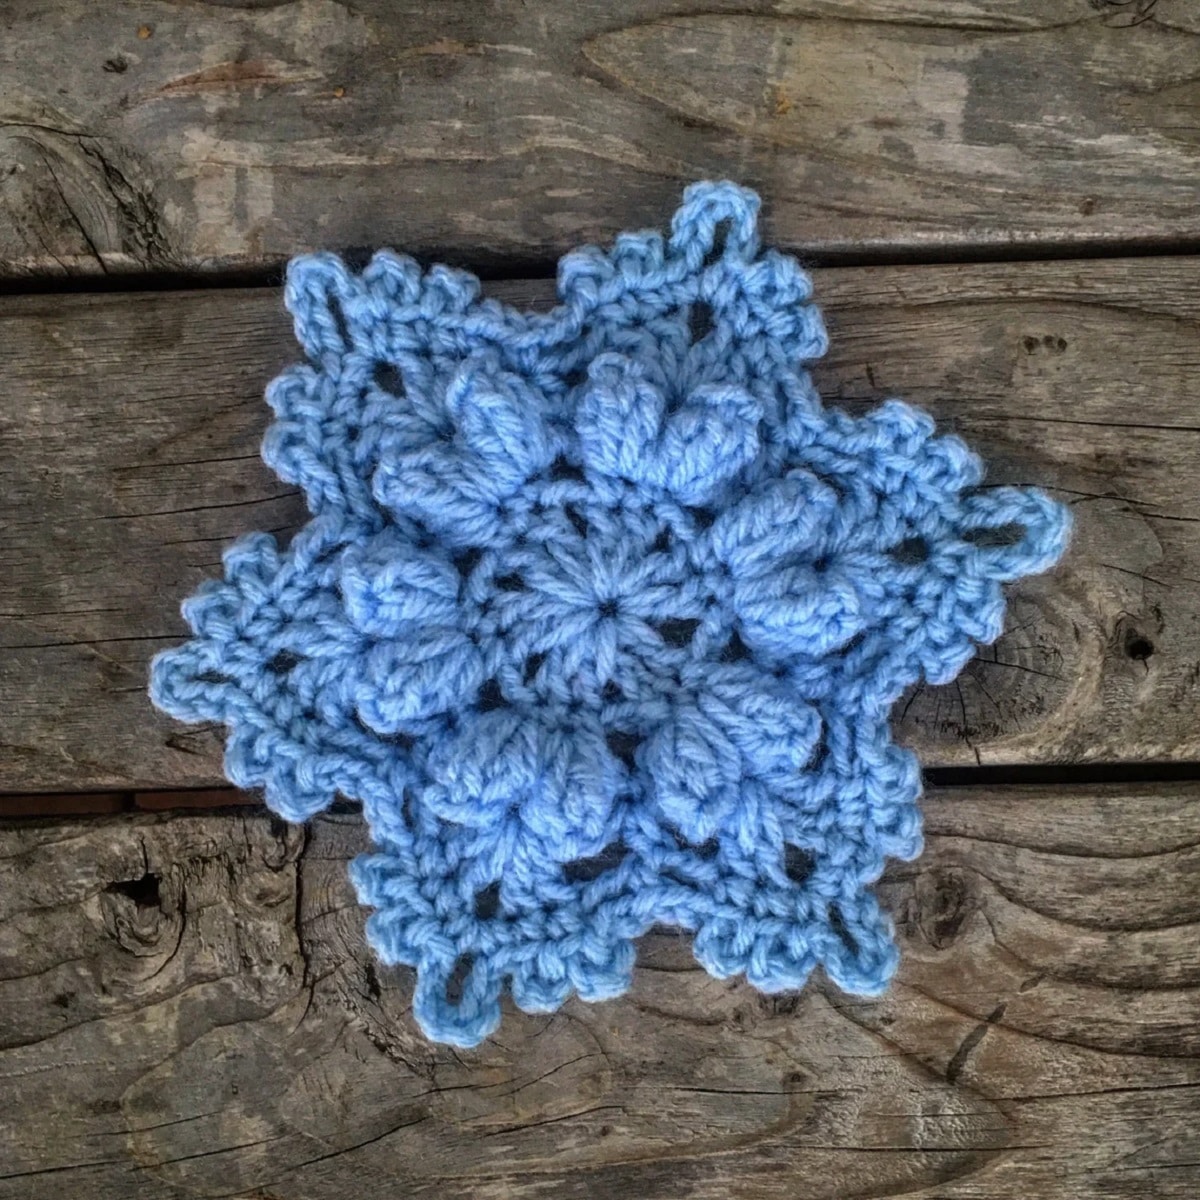 Blue crochet snowflake with a small face trim on each side on a wooden floor.